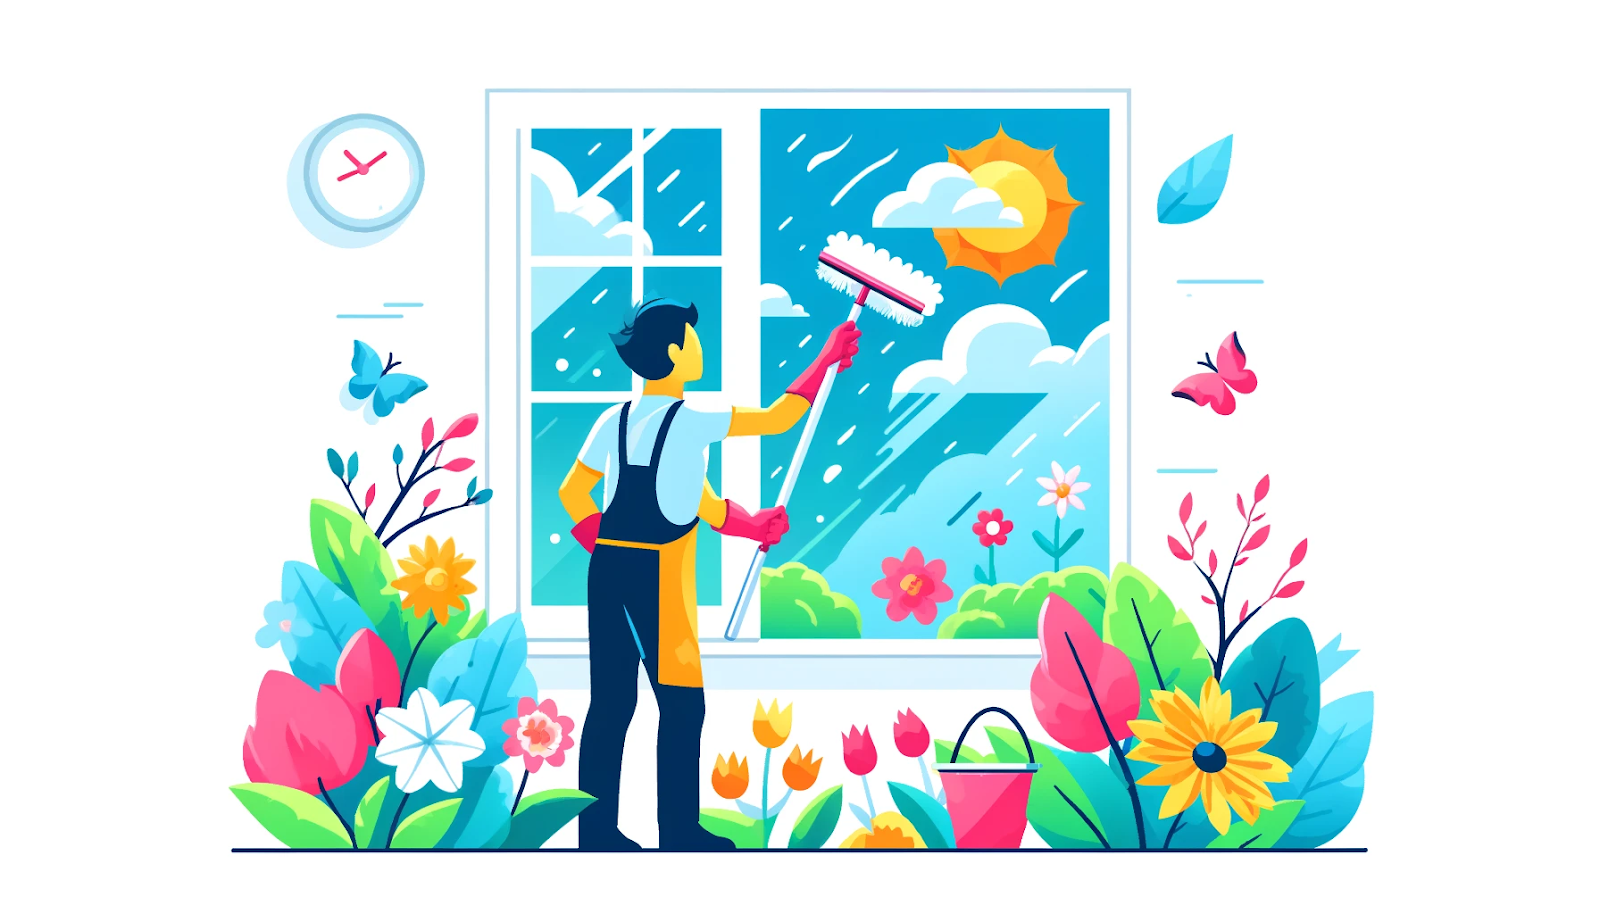 Illustration of window cleaning in spring. The image shows a person cleaning windows with blooming flowers and mild weather in the background. The color scheme is bright and vibrant to represent the freshness of spring.